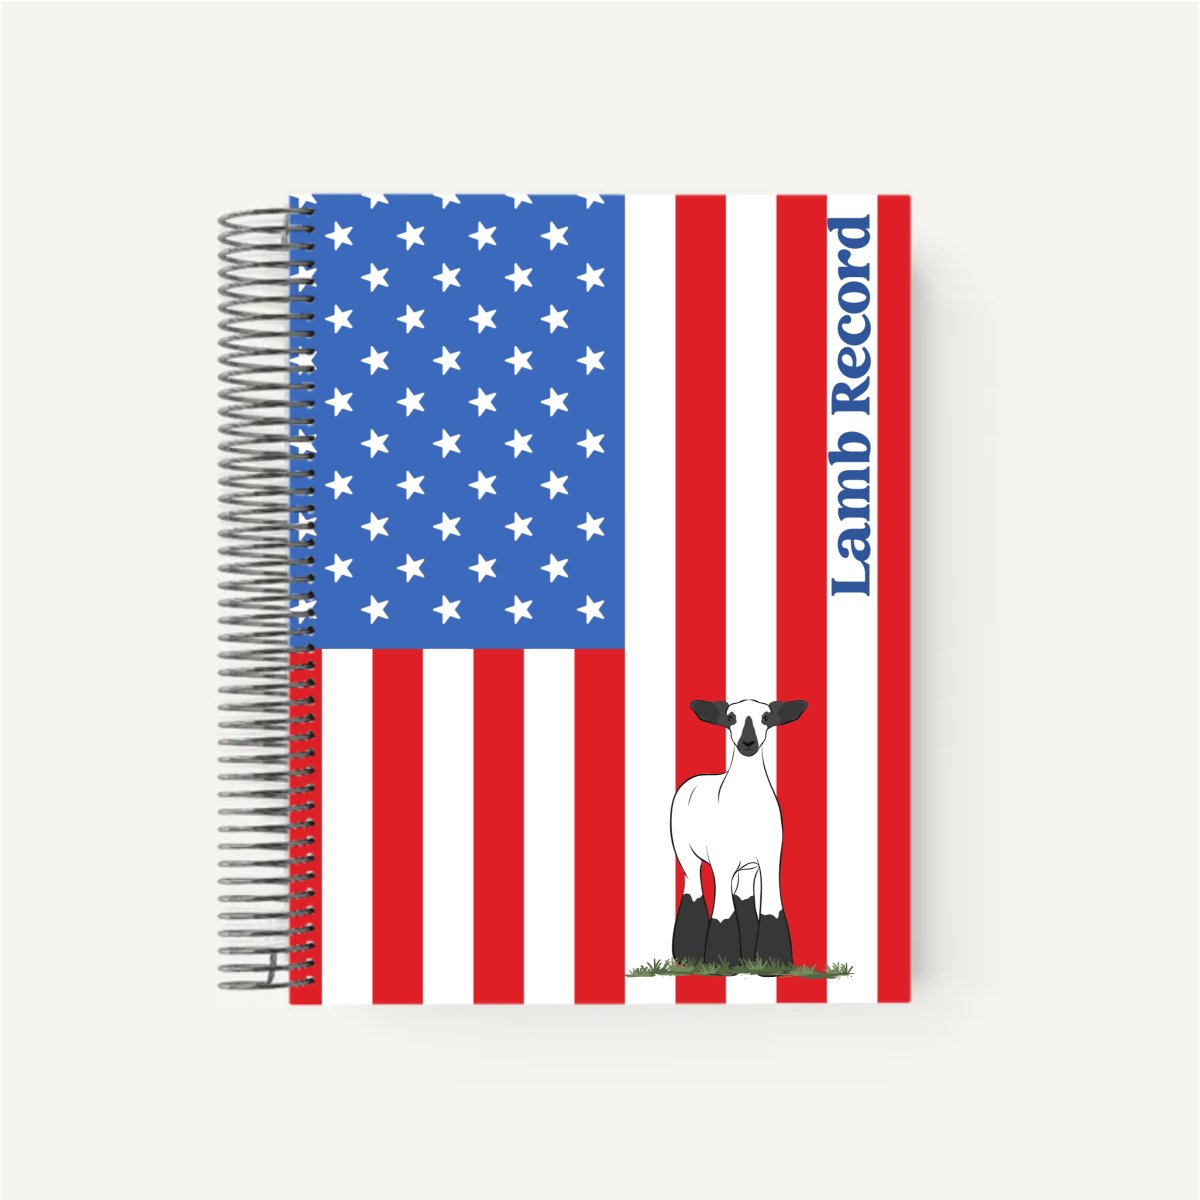 Personalized-Livestock-Lambing Record Planner - Patriotic Cover